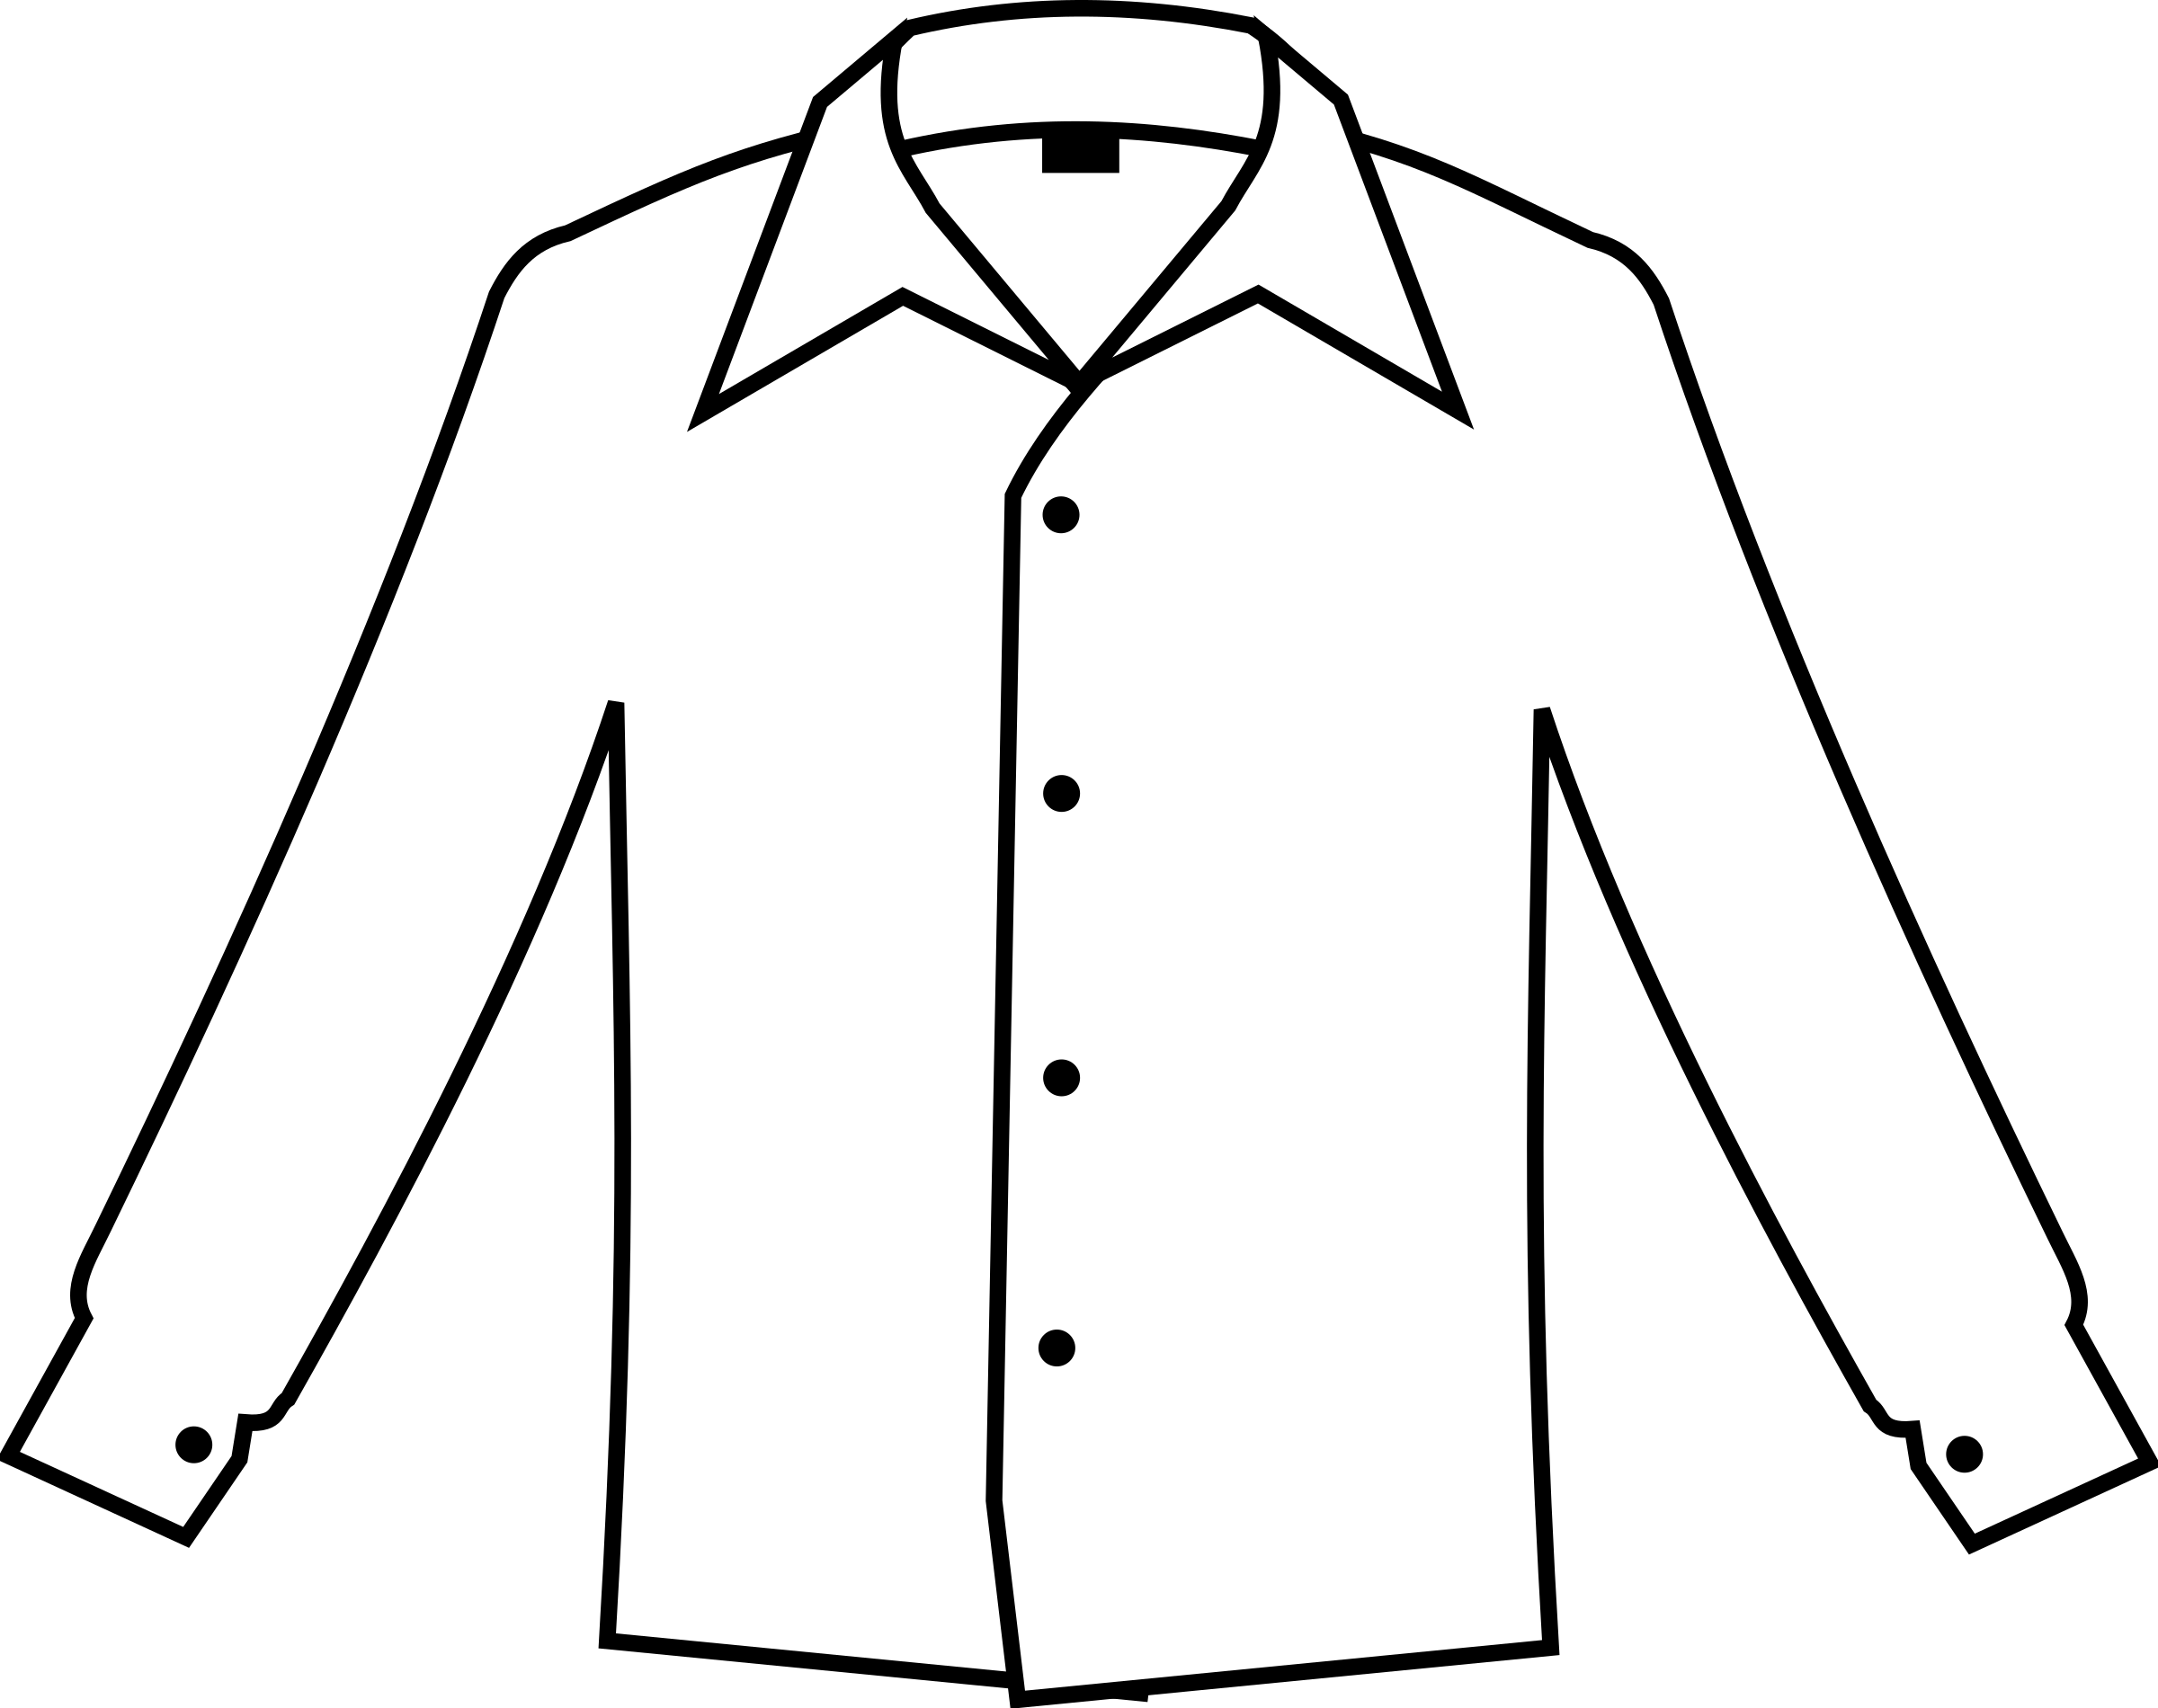  collection of white. Shirt clipart collared shirt